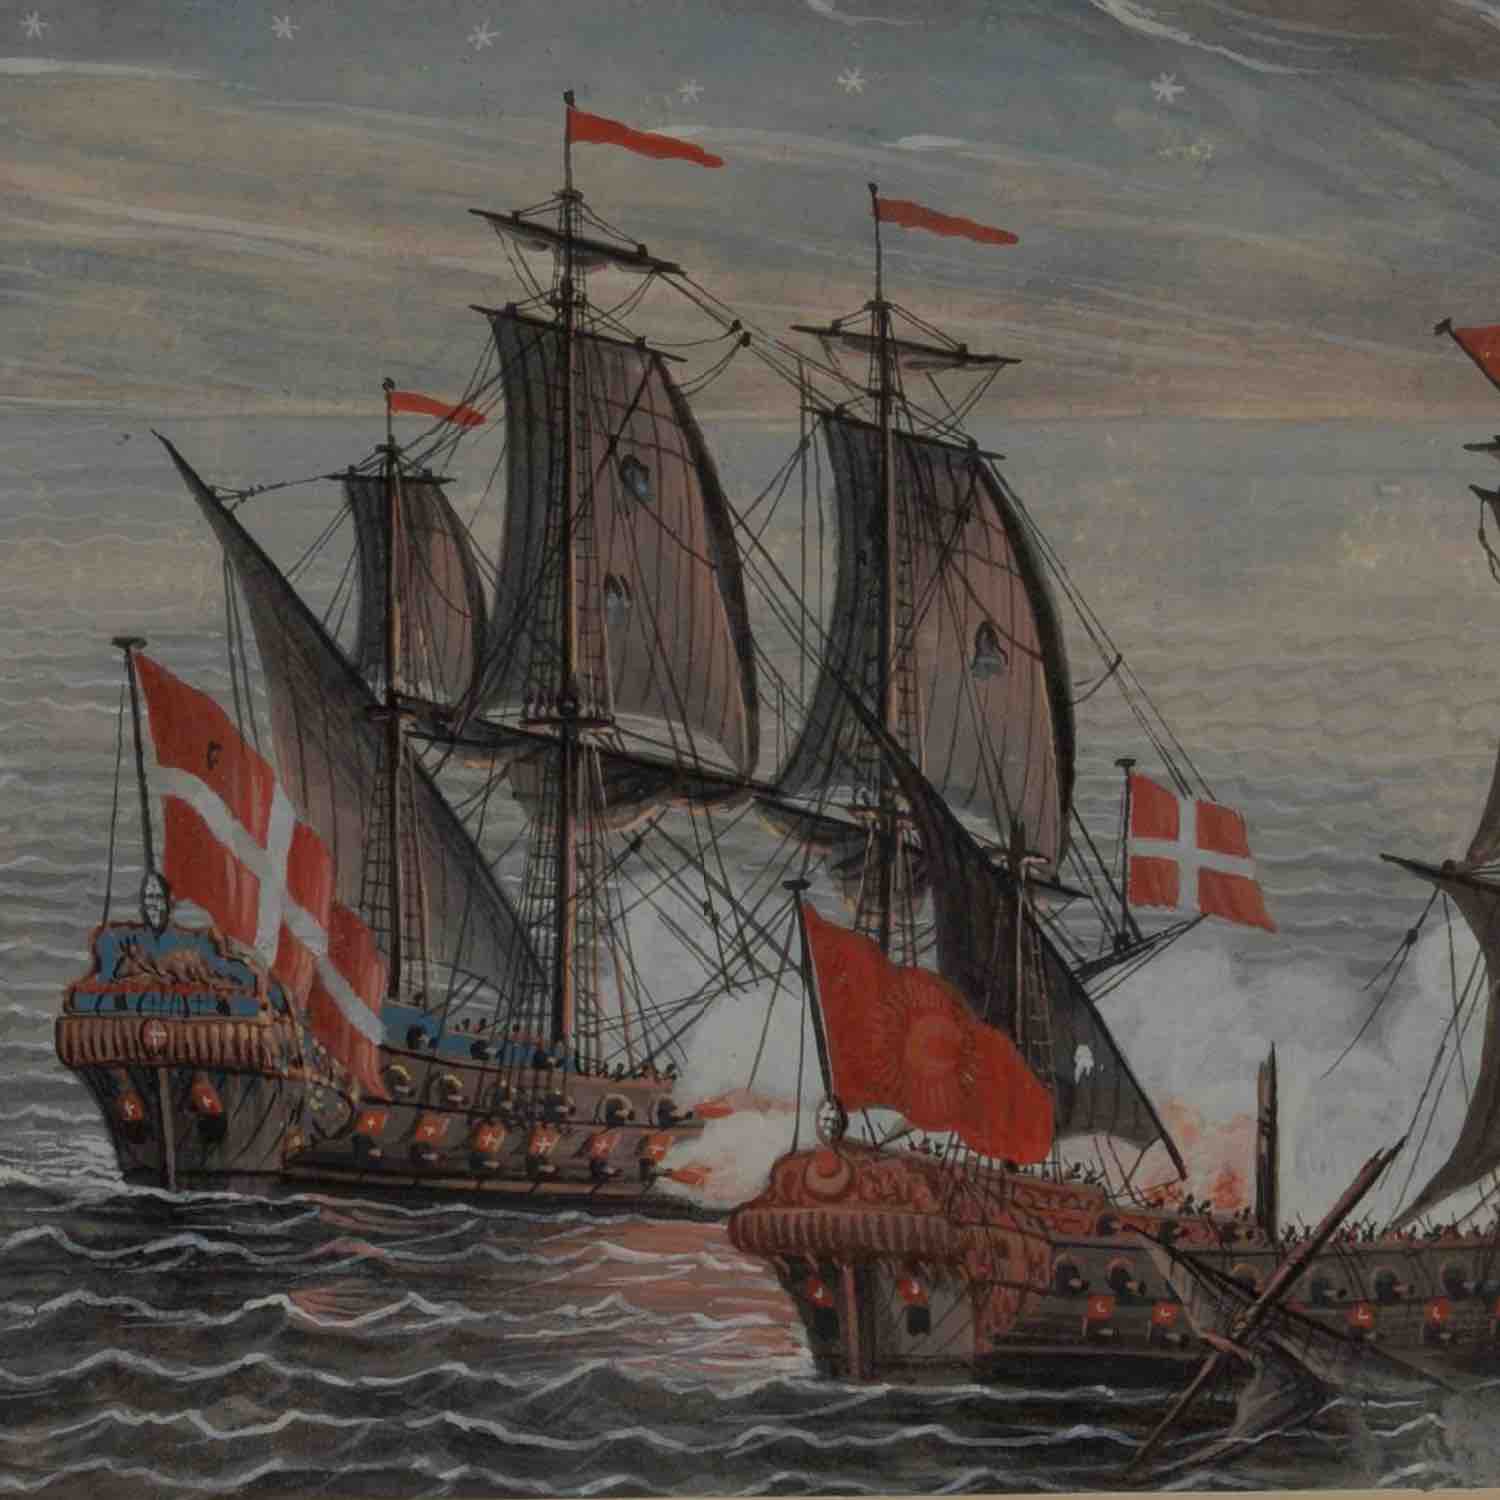 Naval actions of the Order of Saint John, Malta Study Center Collection. (<a href='https://w3id.org/vhmml/museum/view/1755'>HMML 00295</a>)